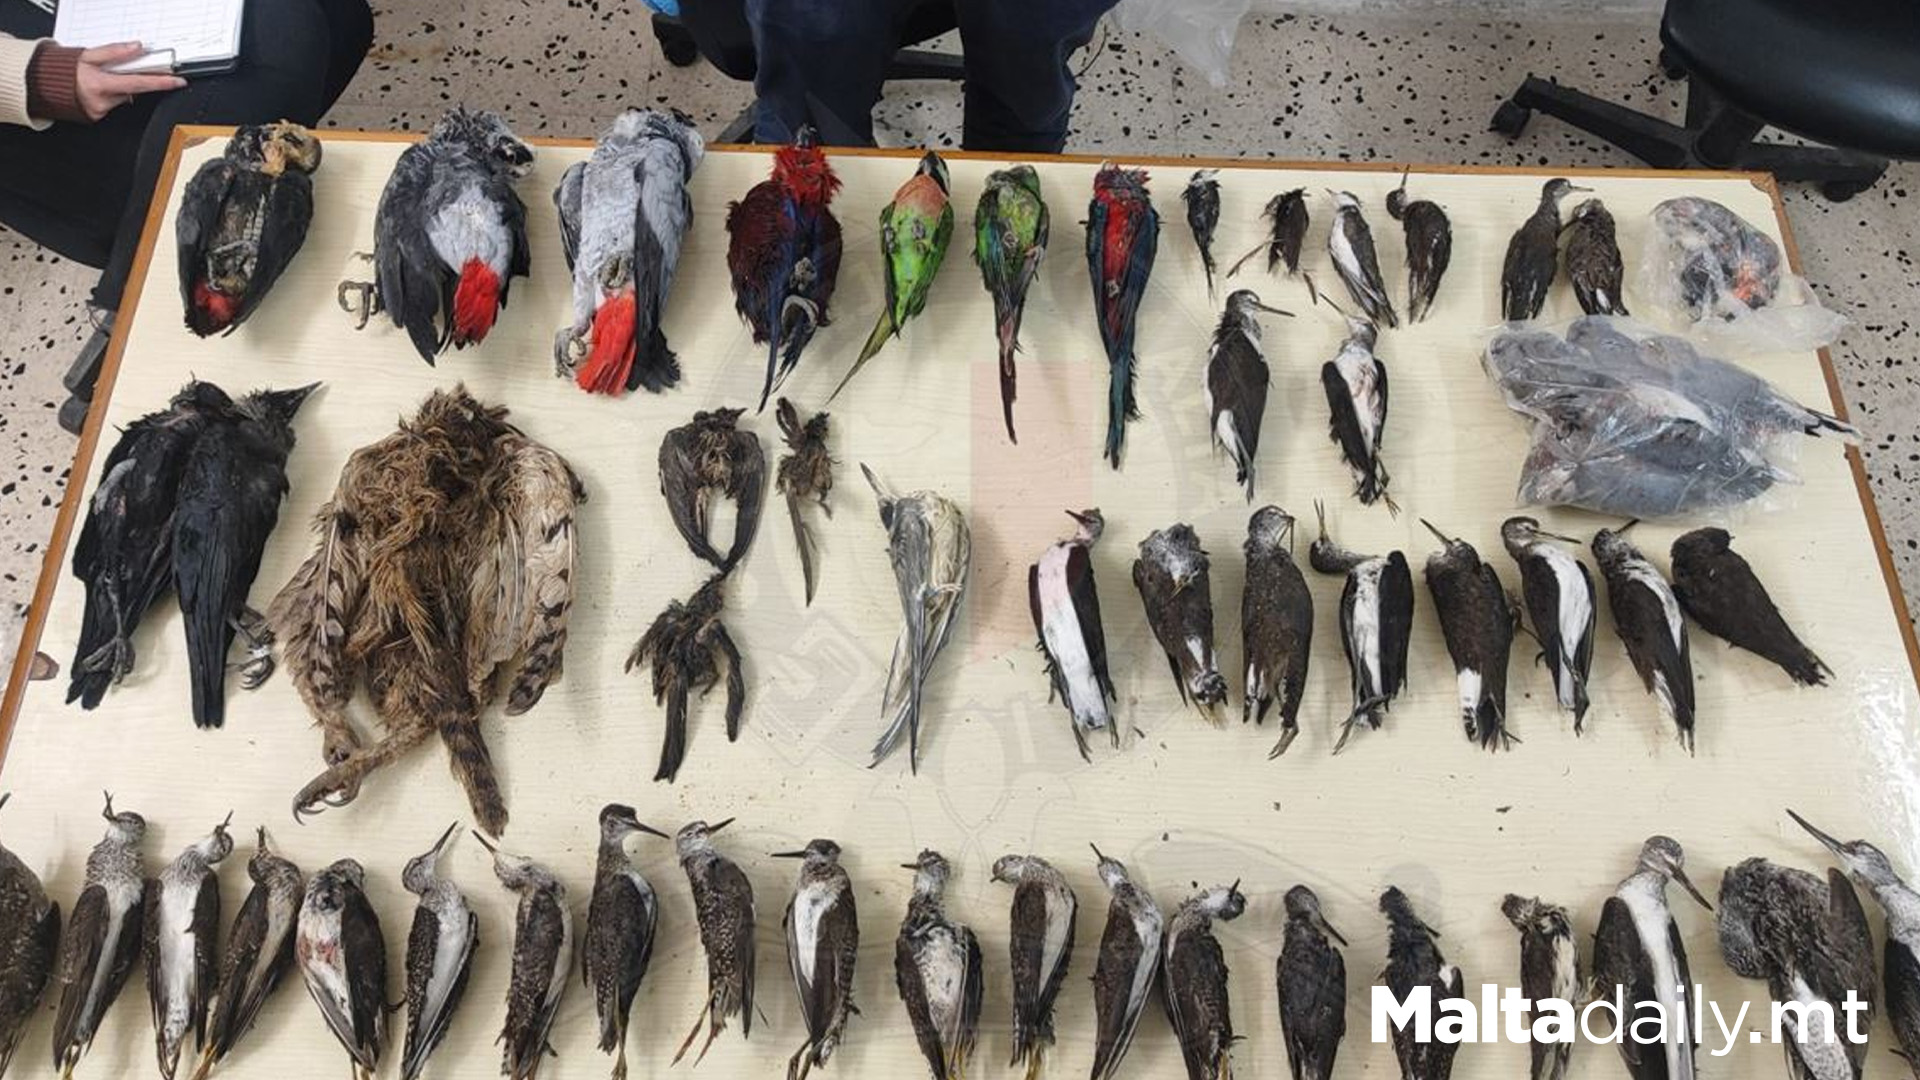 Over 2,500 Protected Bird Carcasses Found In Crime Bust